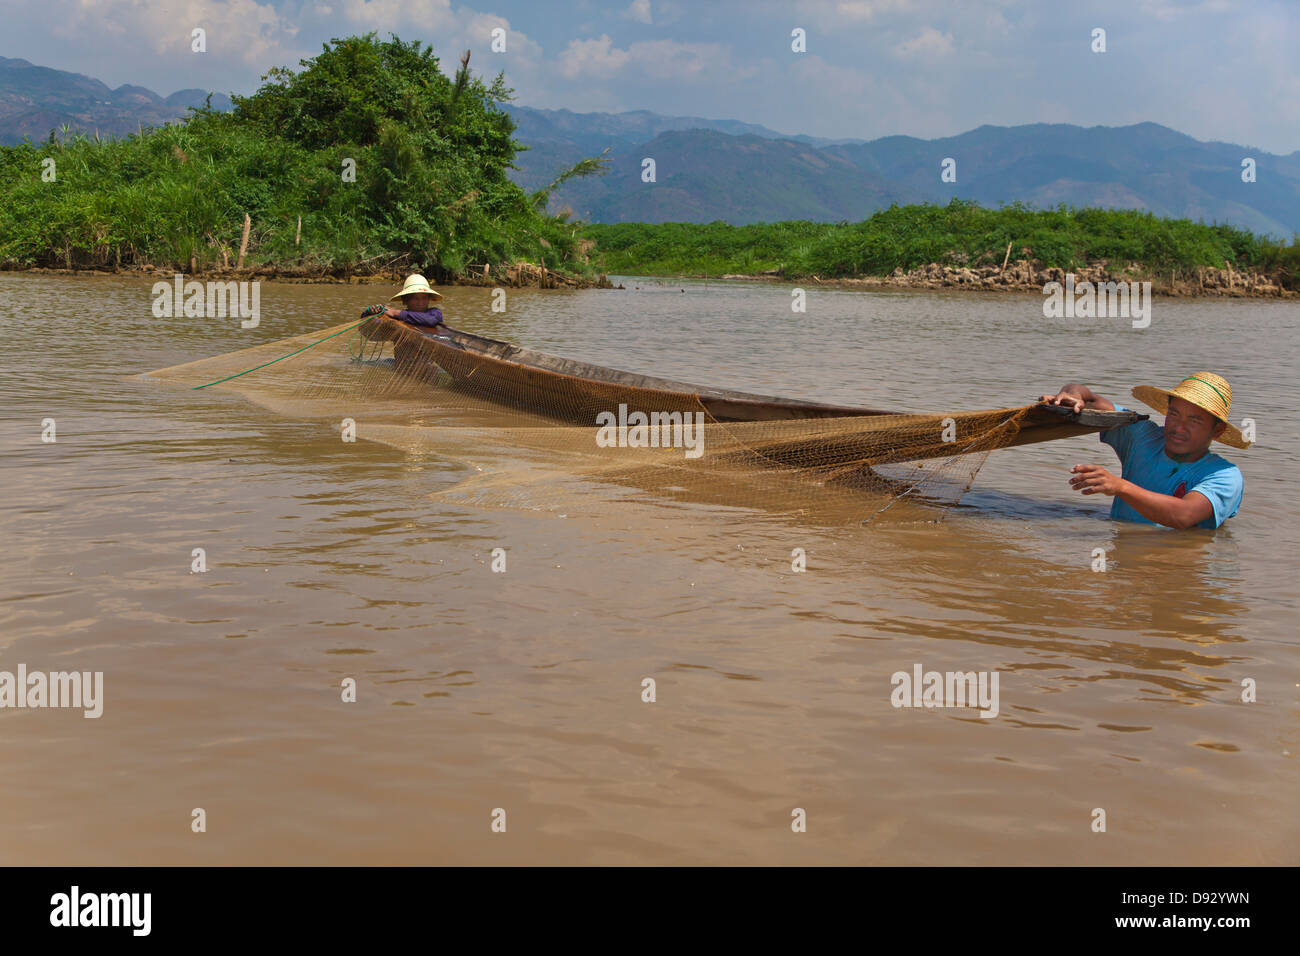 Fishing is still done in the traditonal way with small wooden boats and fishing nets - INLE LAKE, MYANMAR Stock Photo